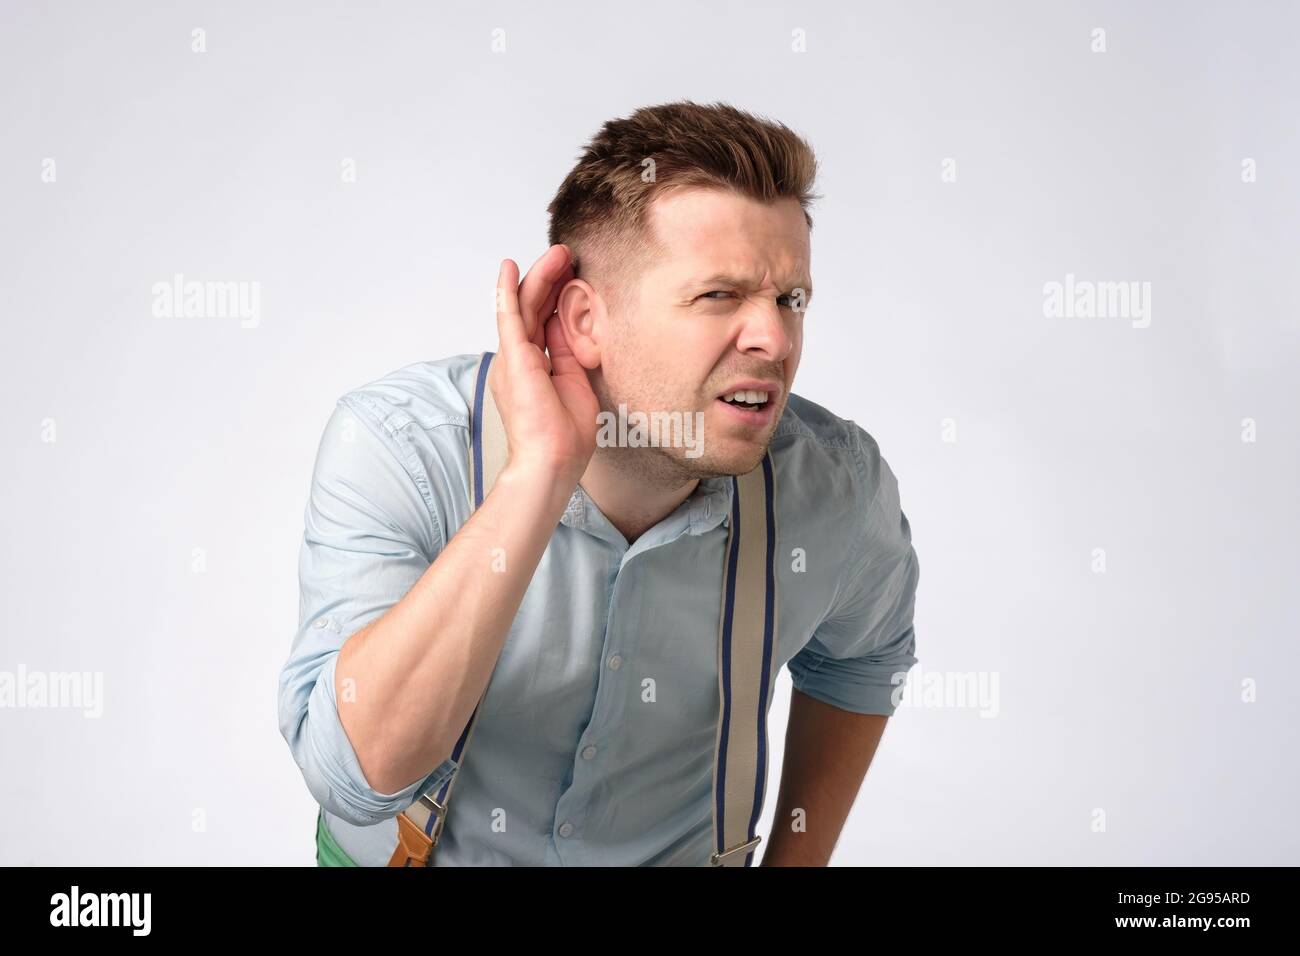 Man putting hand near ear listening for a quiet sound or paying attention Stock Photo